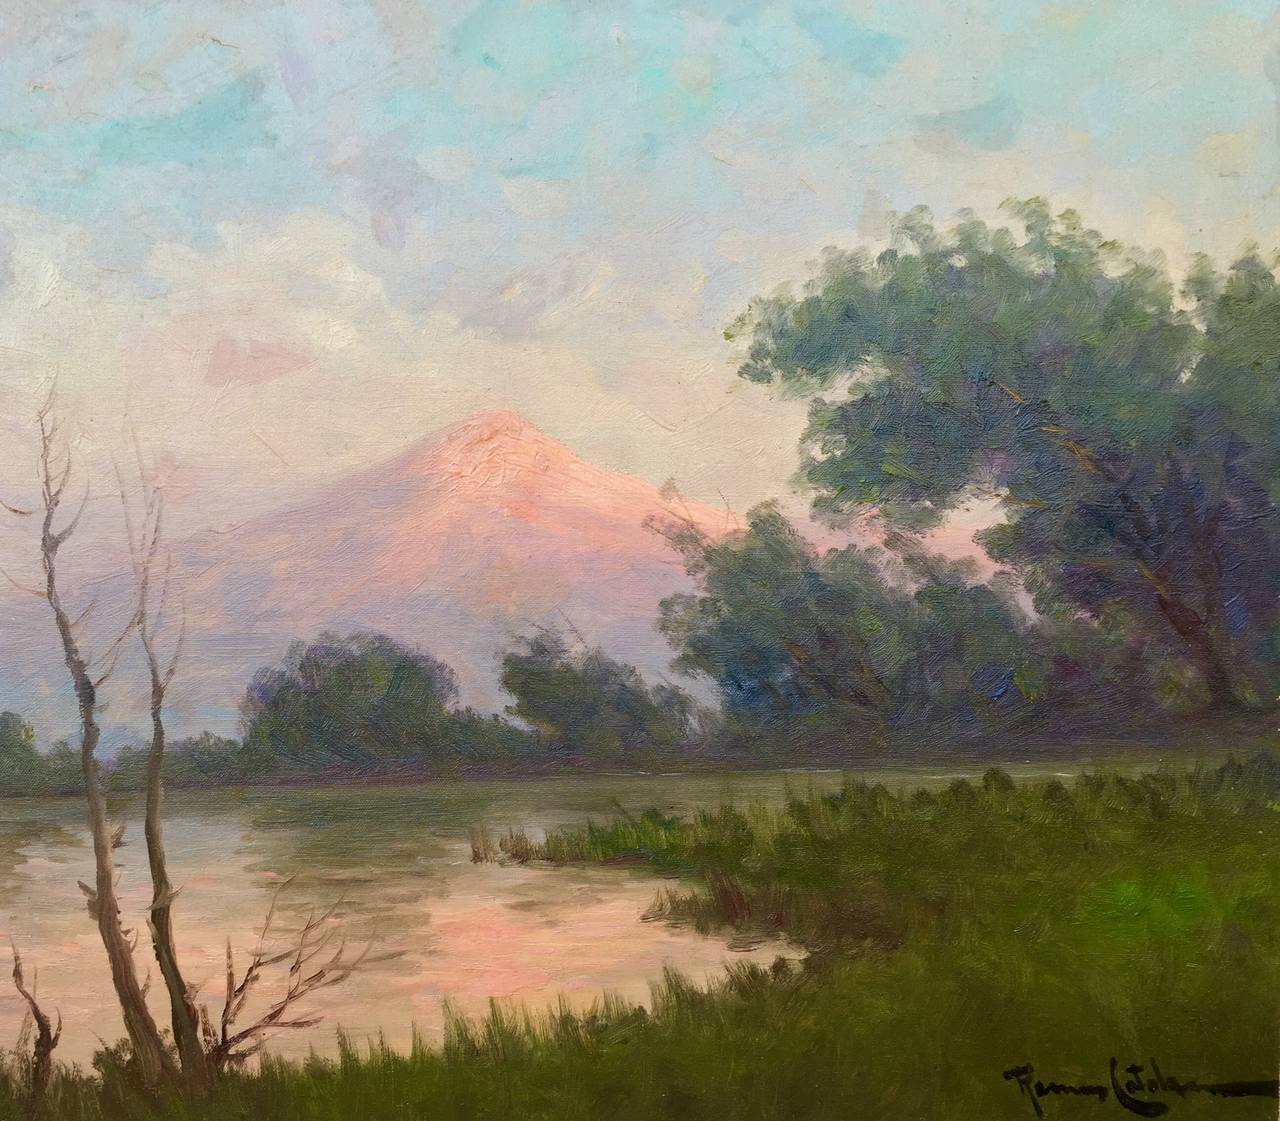 Benito Ramos Catalan Landscape Painting - "Twilight in the Andes"